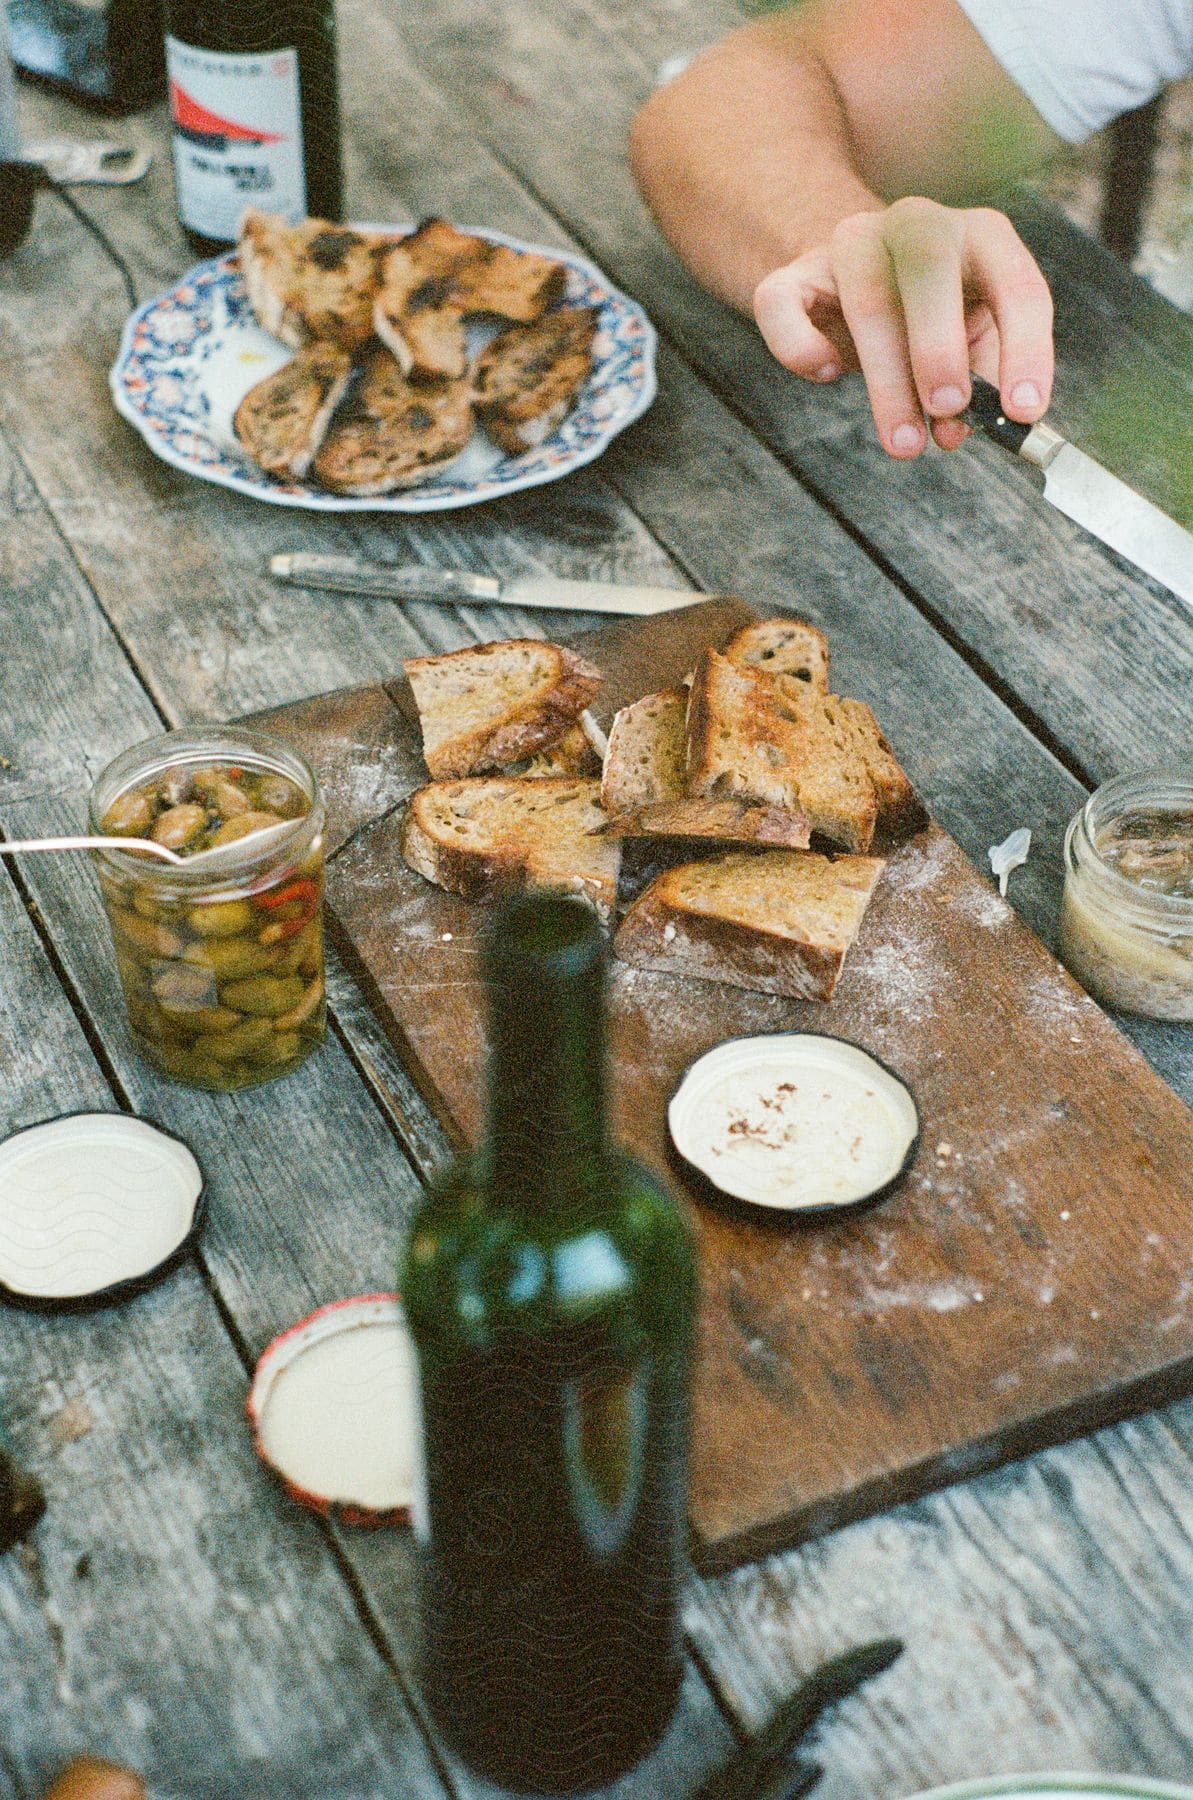 Rustic outdoor dining setup with toasted bread slices on a wooden cutting board, a jar of olives, and an open bottle of wine on a weathered wooden table.